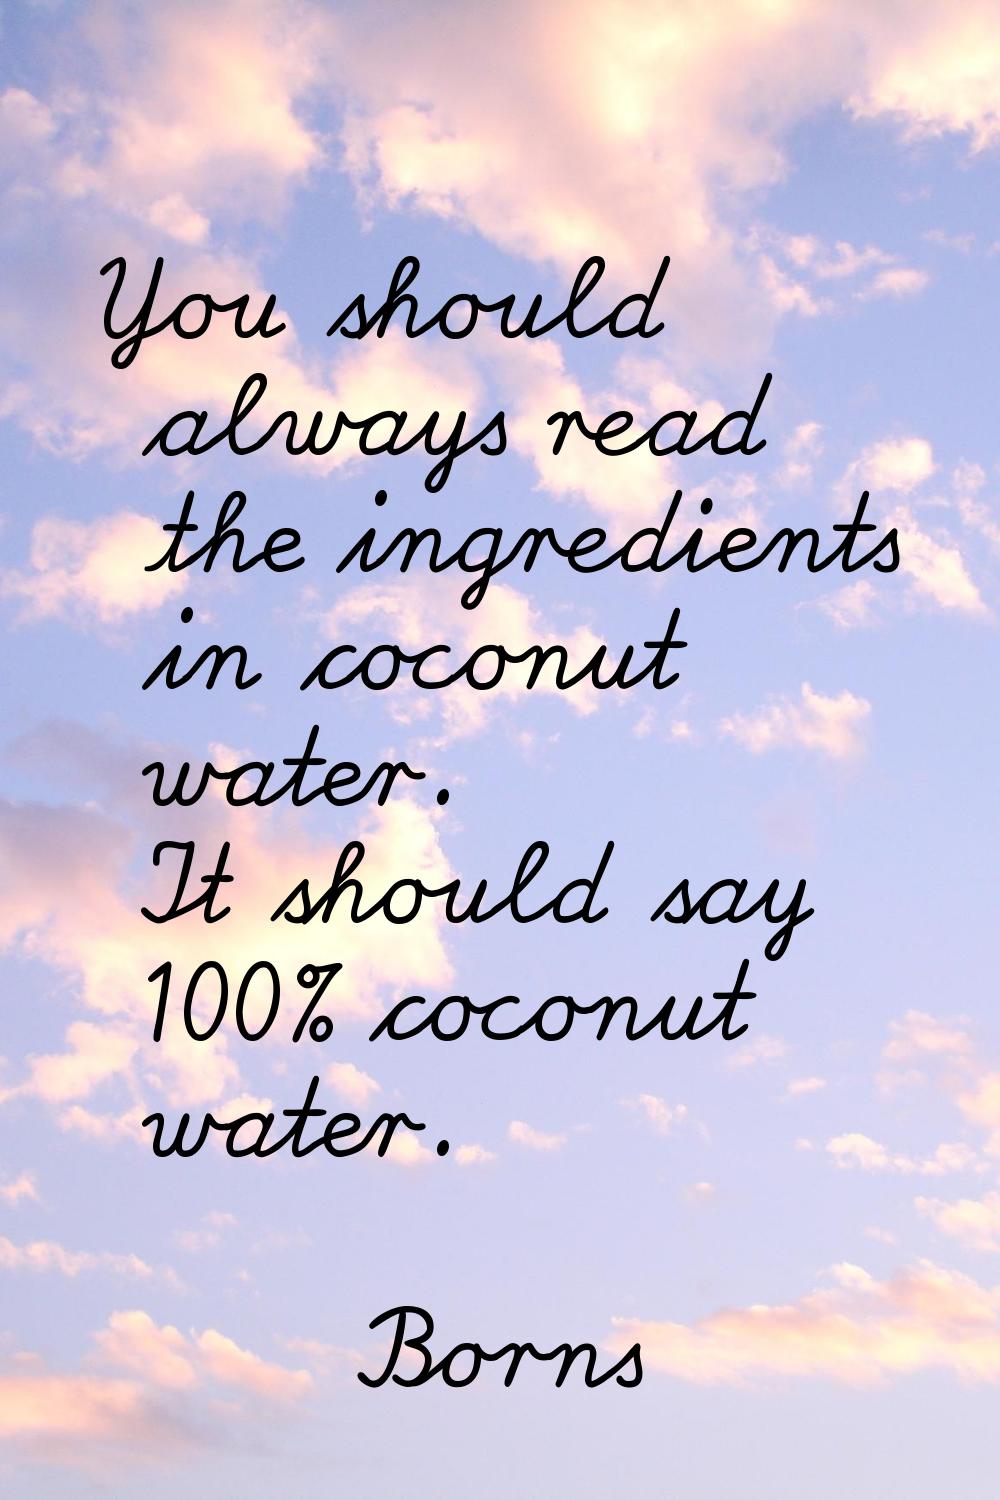 You should always read the ingredients in coconut water. It should say 100% coconut water.